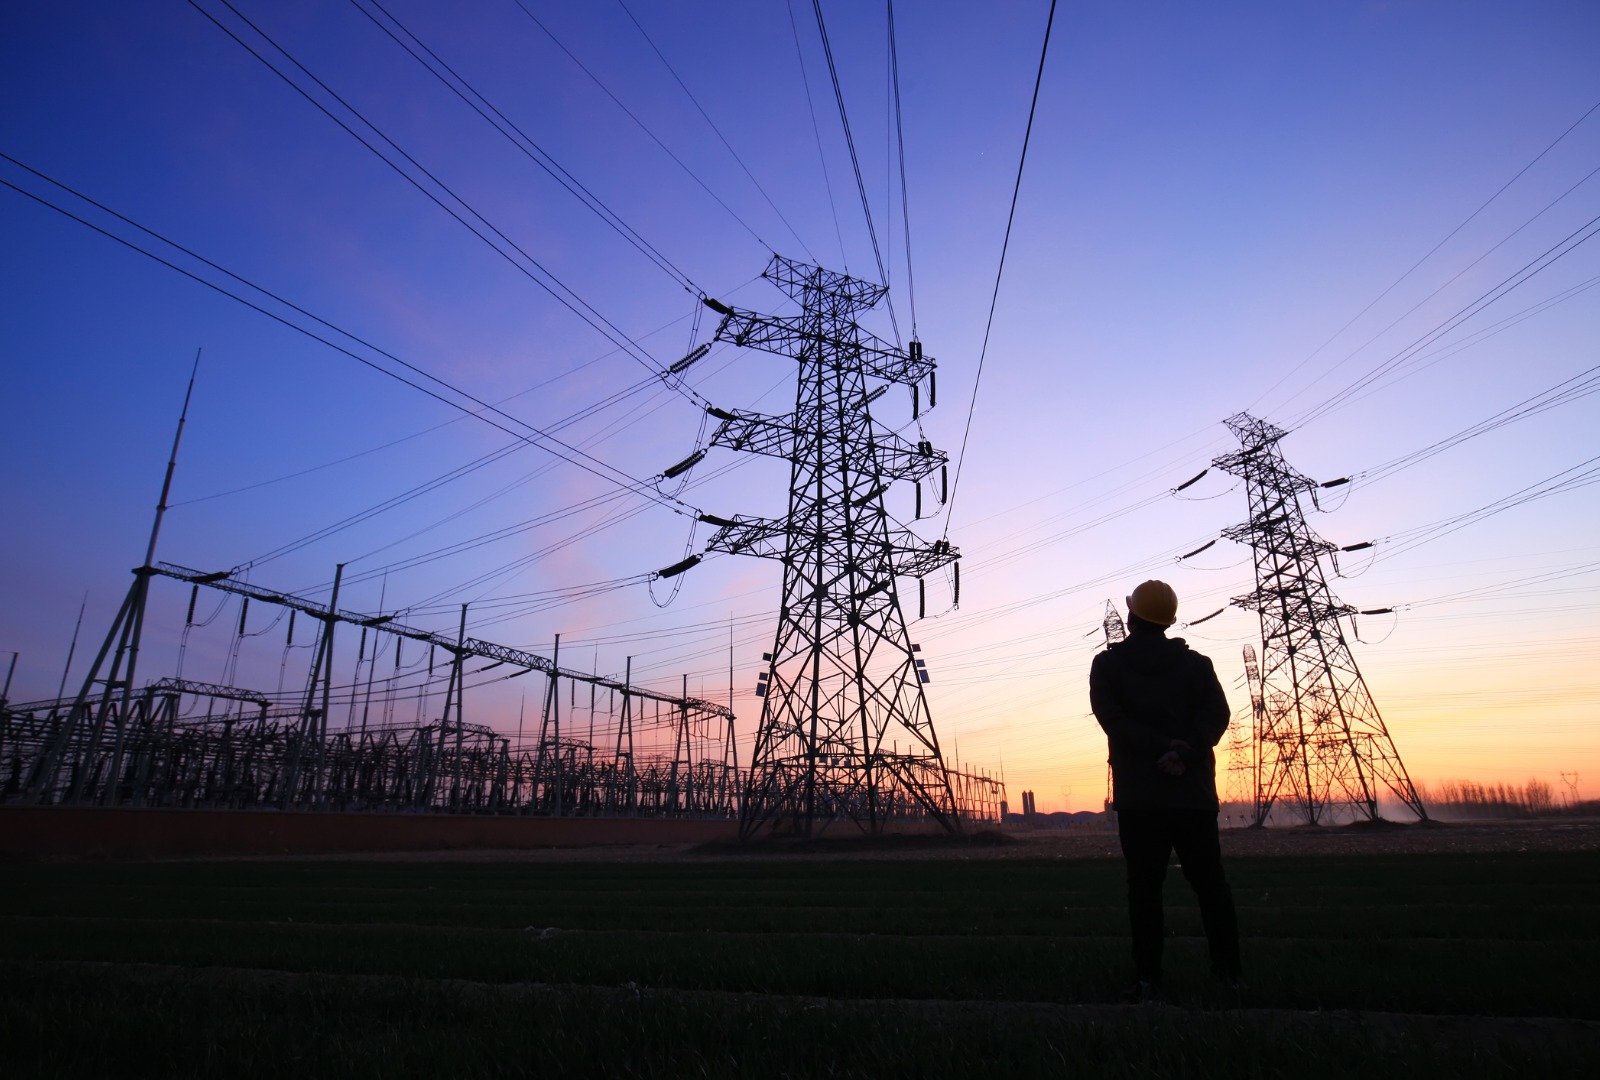 electricity-workers-and-pylon-silhouette-picture-id1252617520